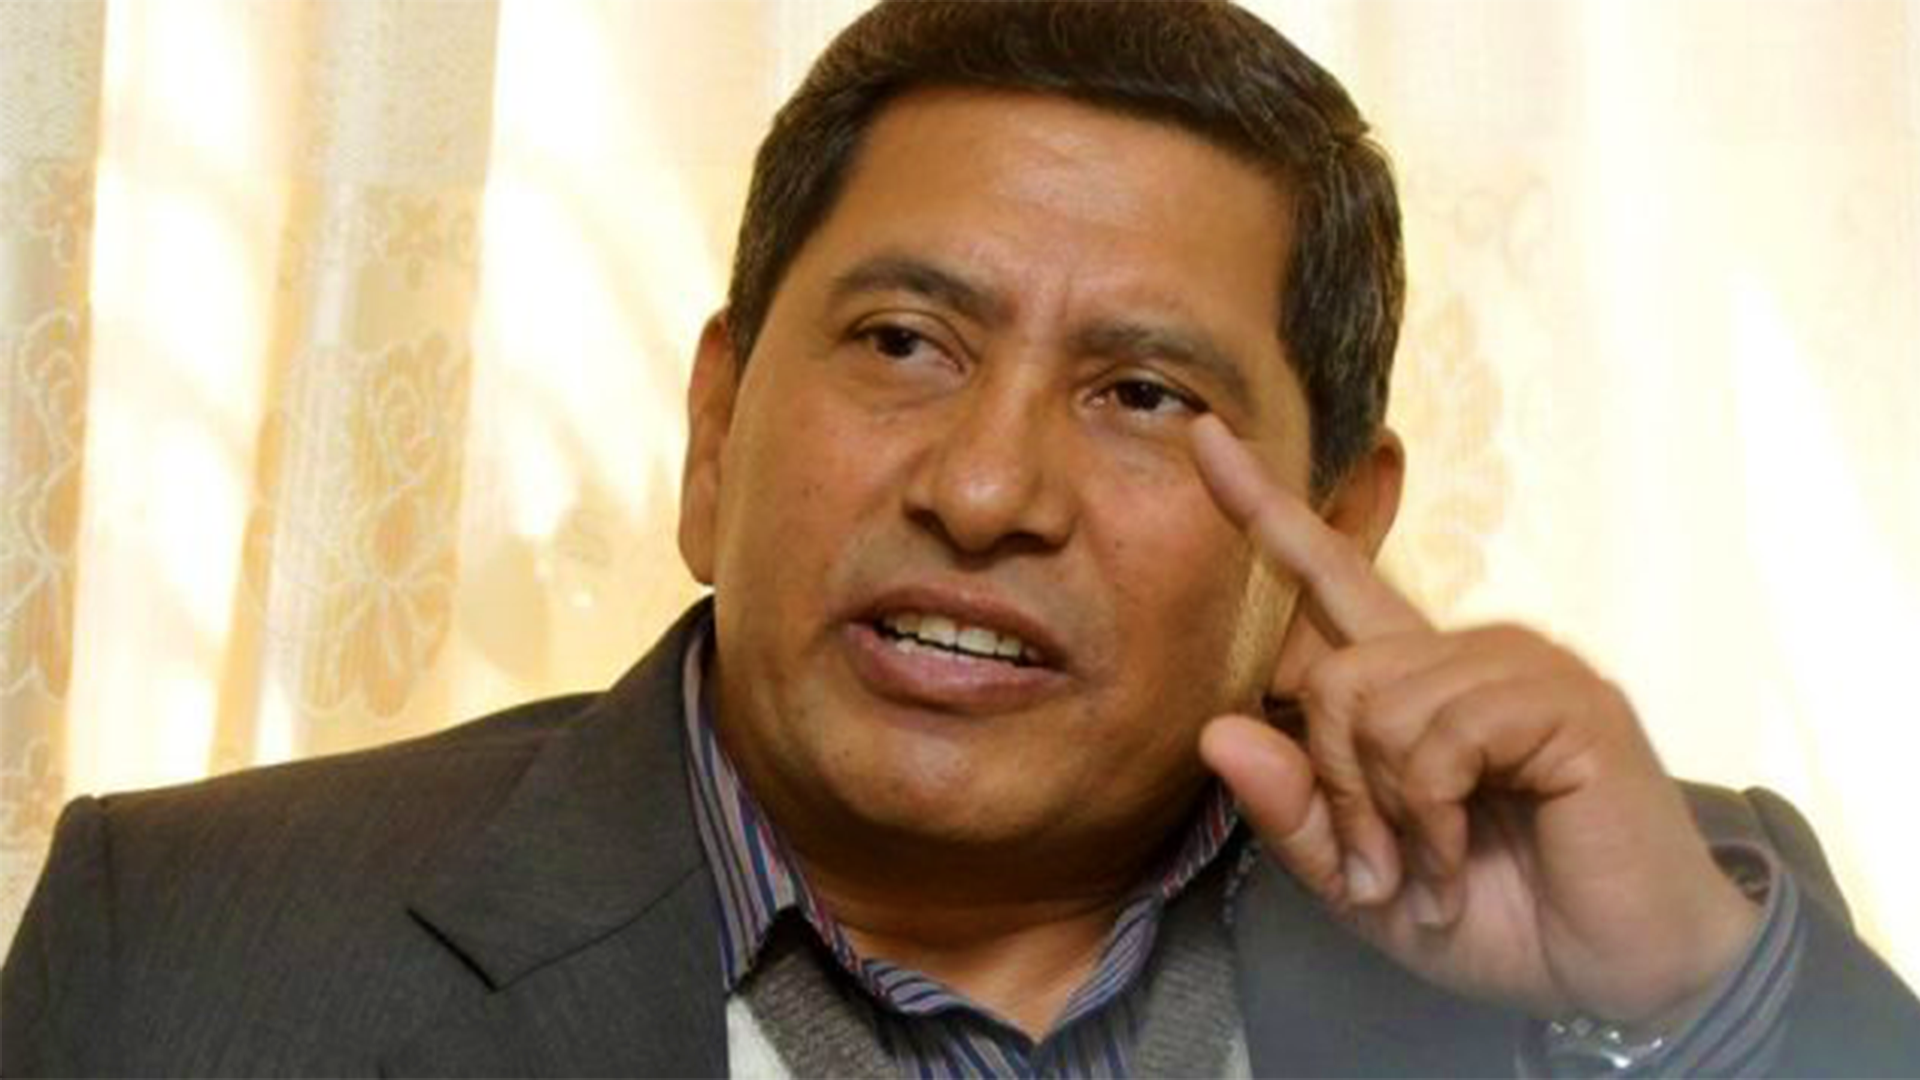 PM does not have the right to dissolve the constitution to protect his position: Narayan Kaji Shrestha